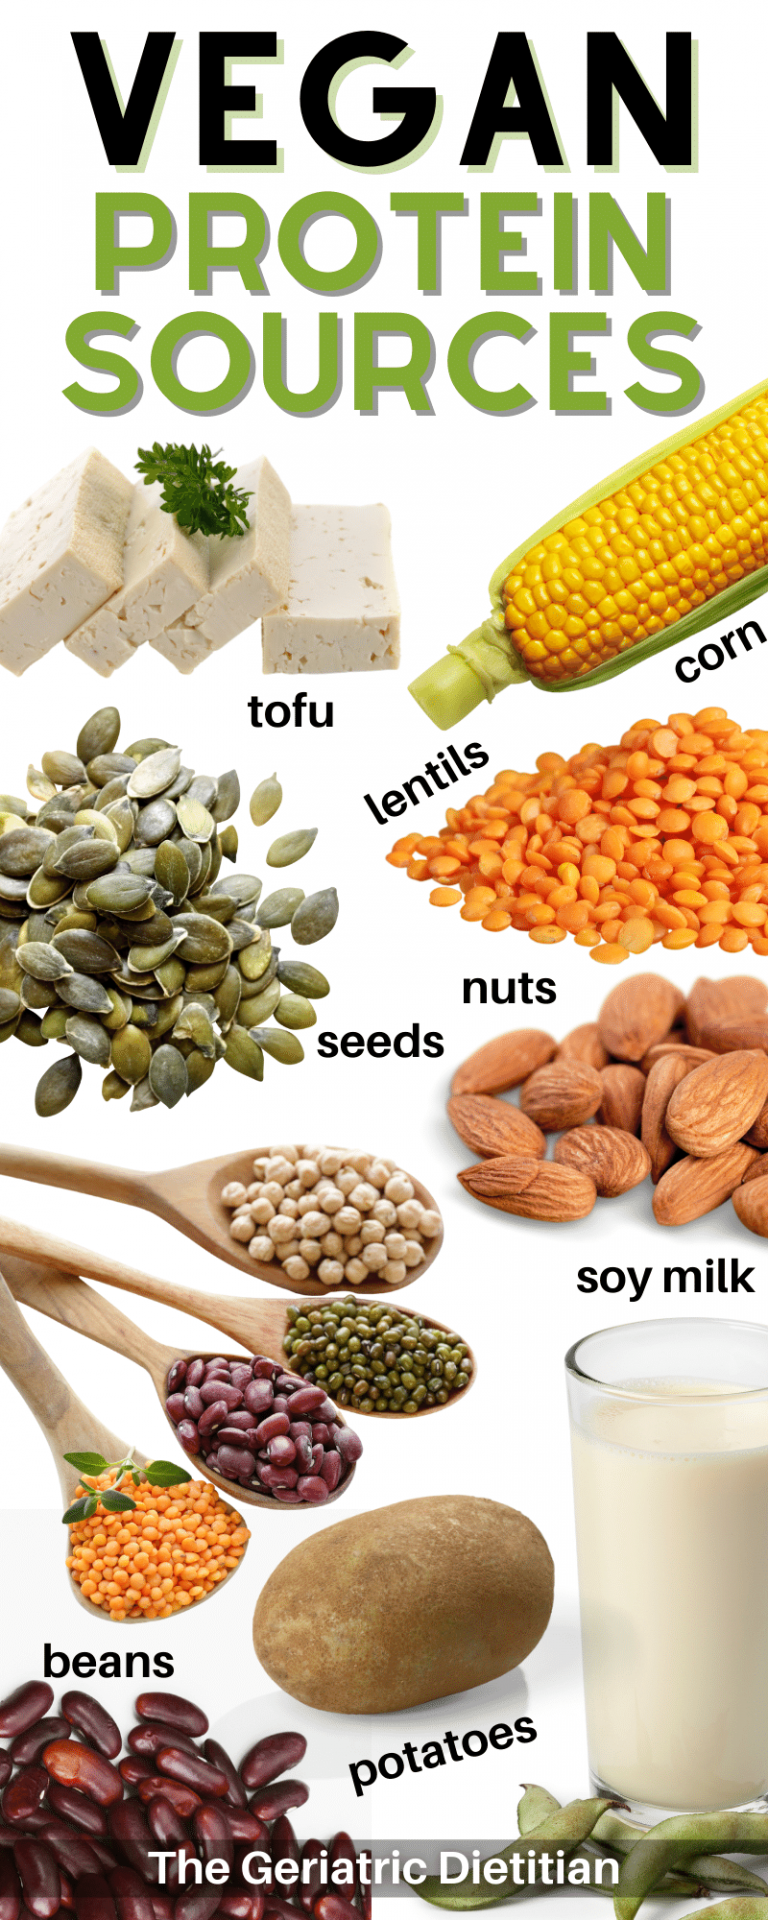 Vegan Protein Sources Chart [Free Download] - The Geriatric Dietitian